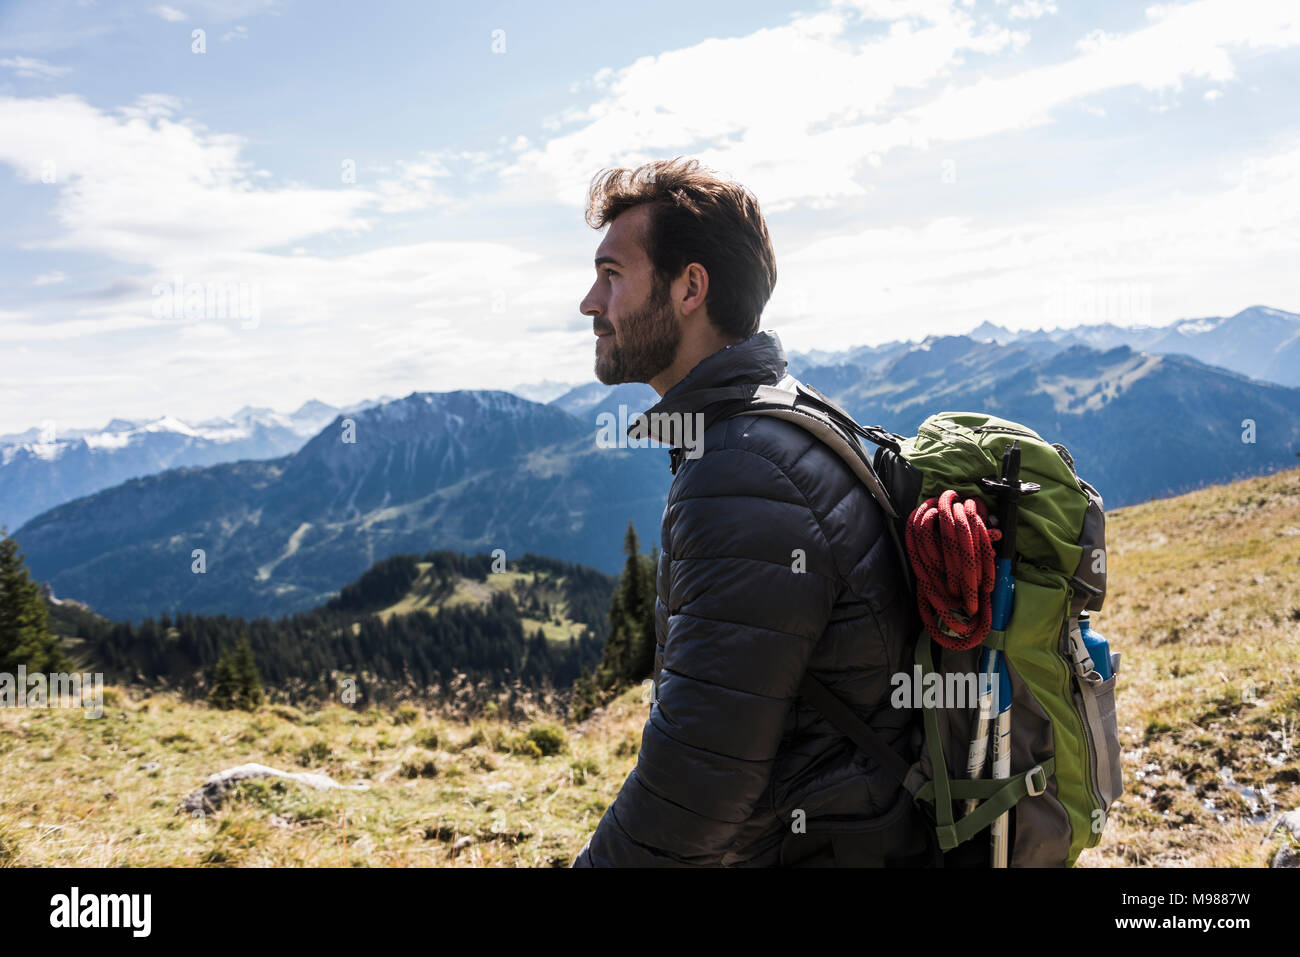 Austria, Tyrol, young man in mountainscape looking at view Stock Photo